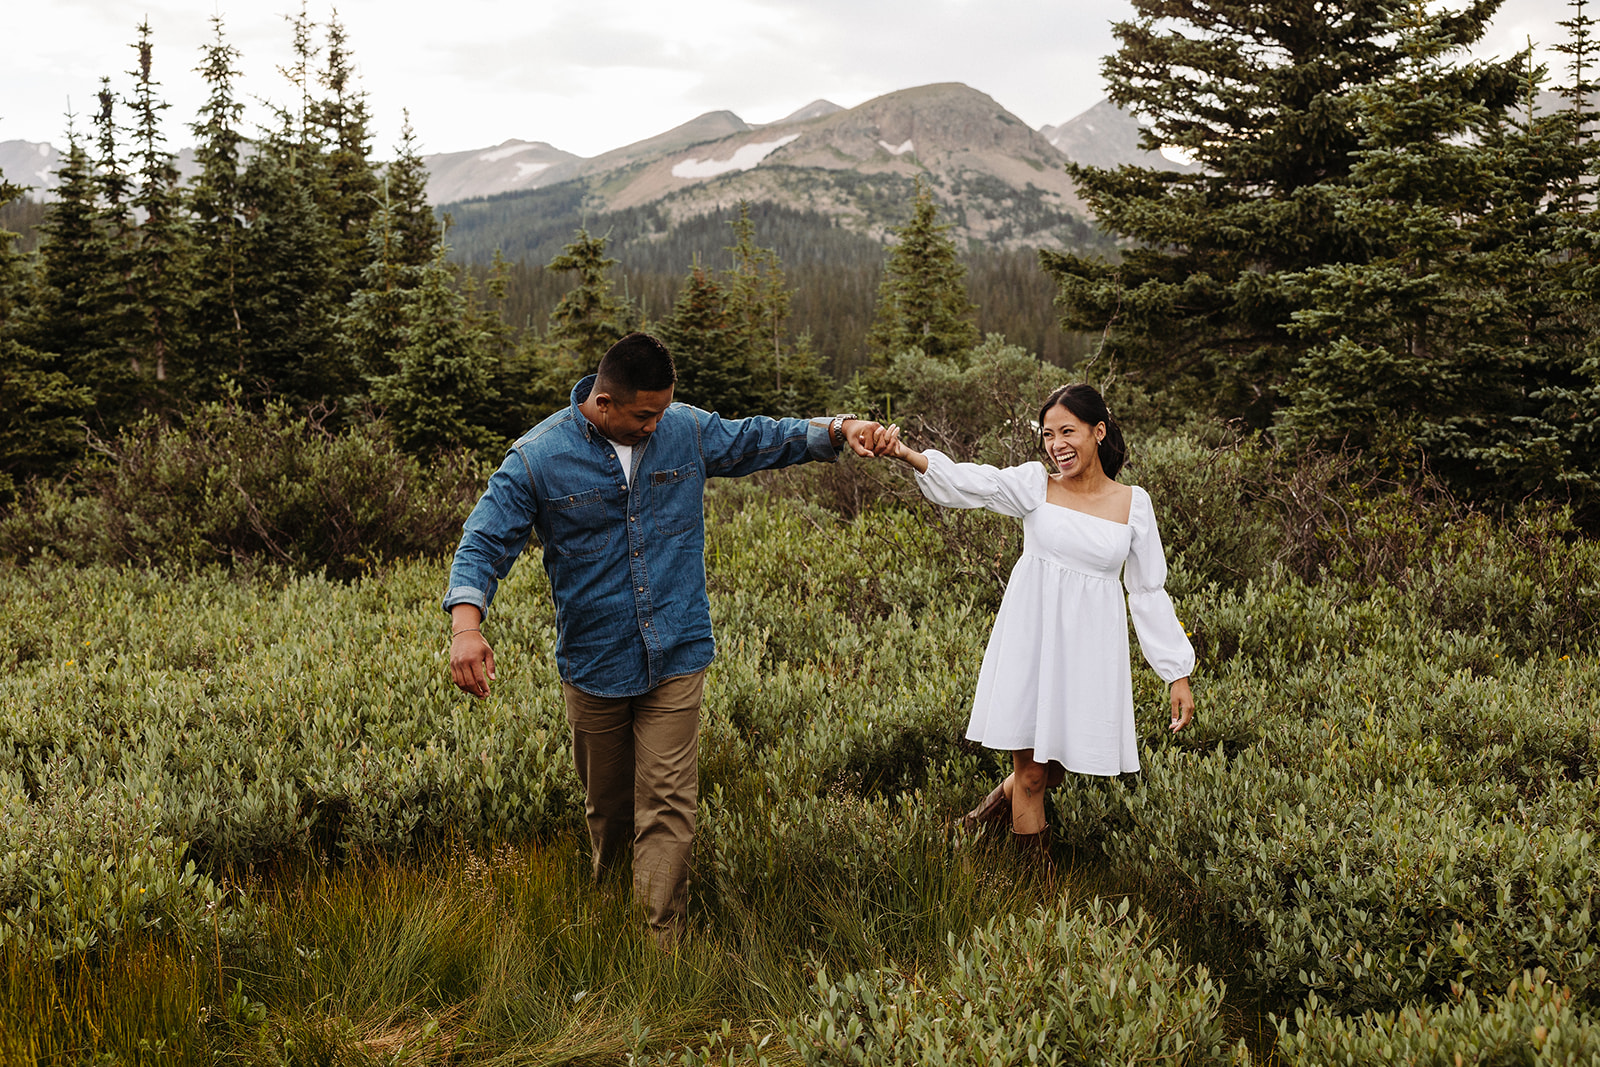 The two hold hands while walking through the meadow, with the green trees and mountains behind them.